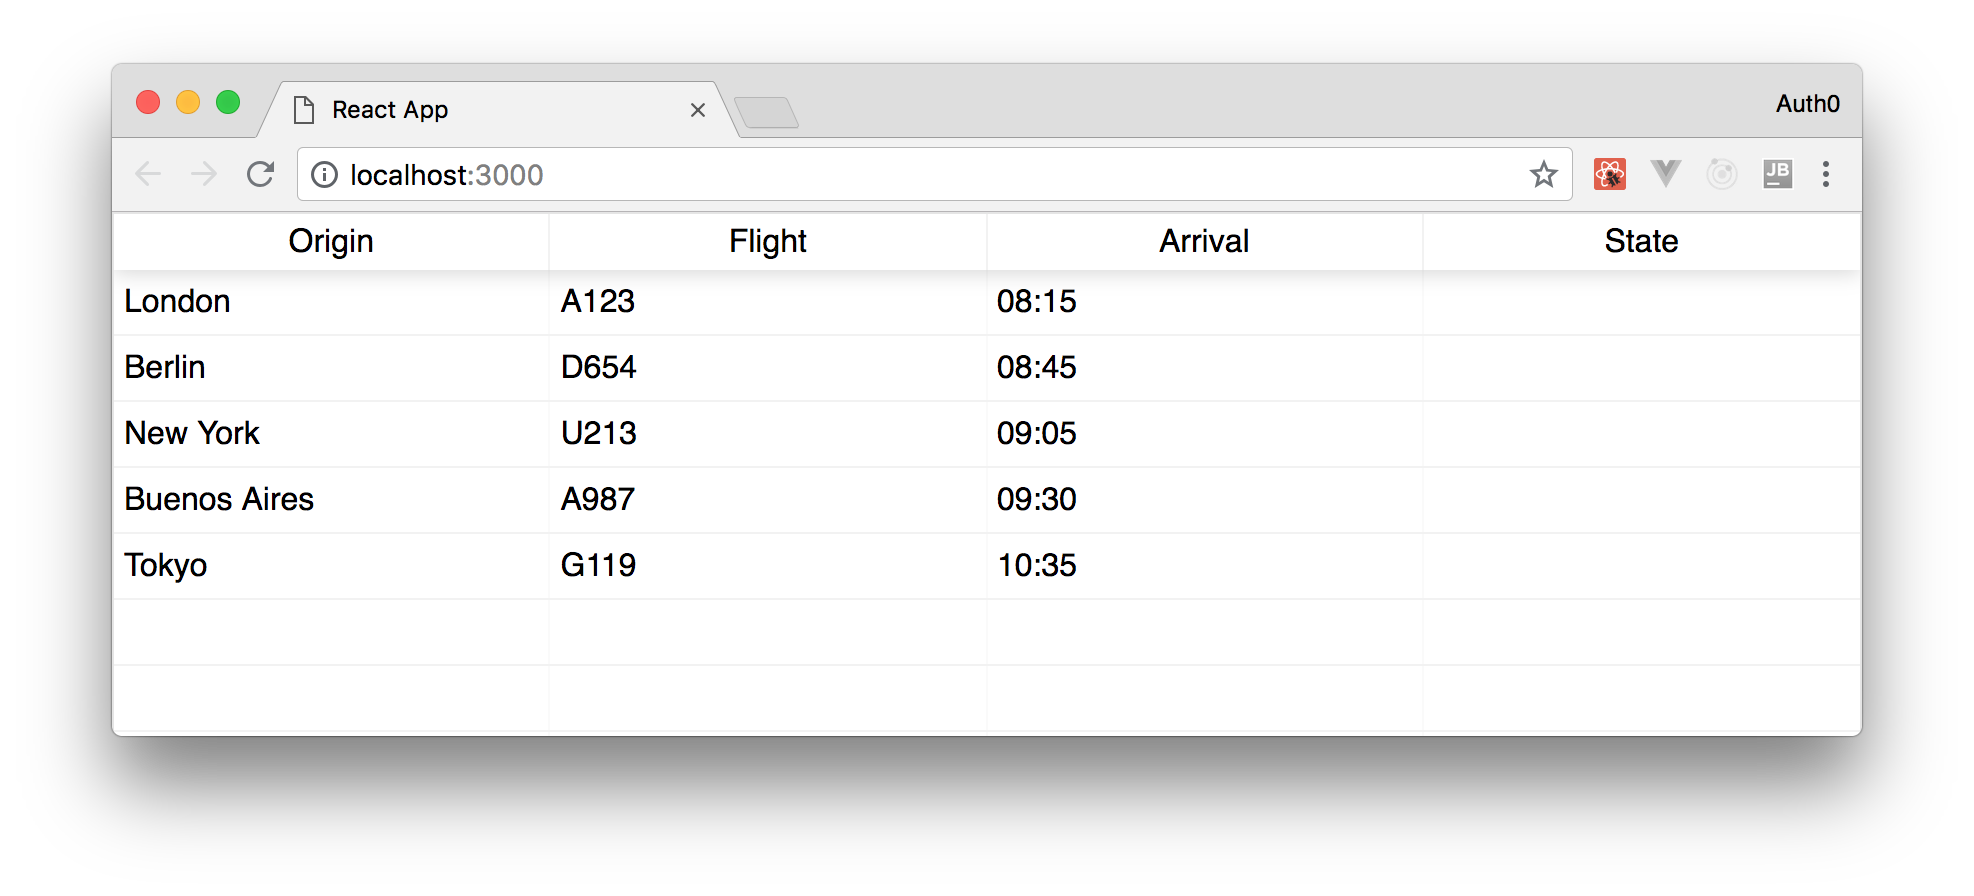 Locally running the real-time flight tracker web application.